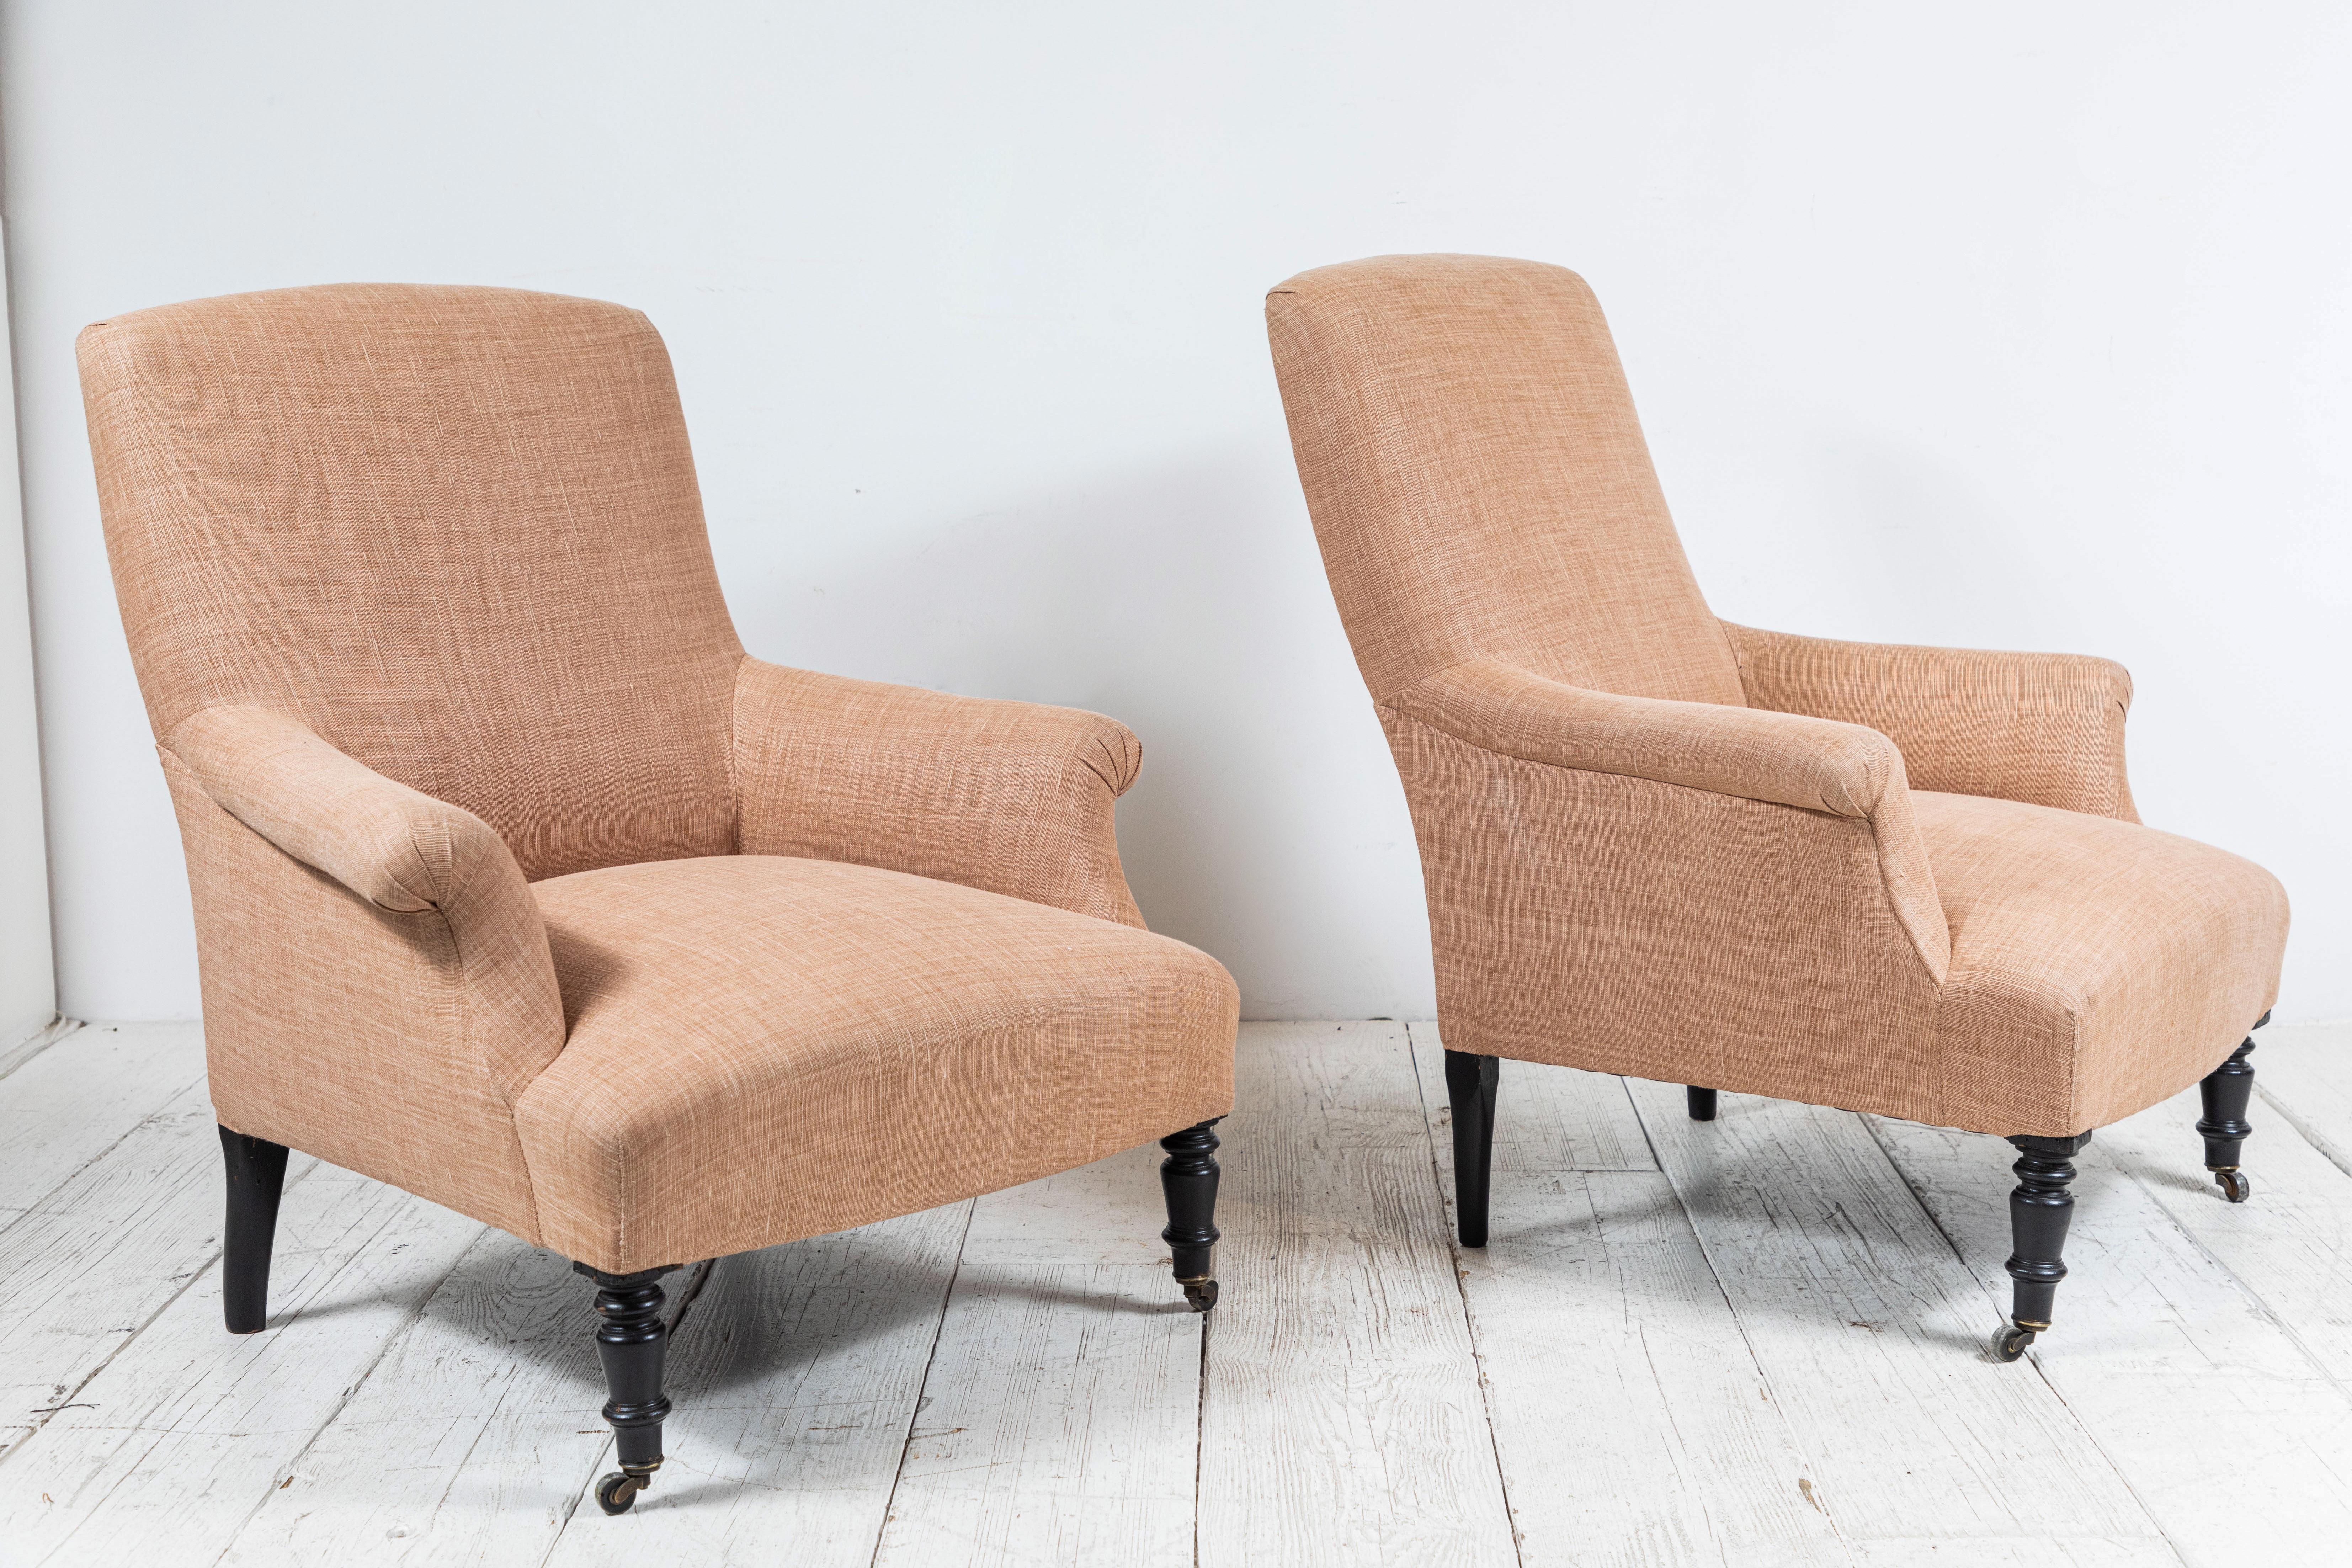 Pair of French club chairs upholstered in rose colored Linen. Club Chairs are offered with original turned legs on casters.